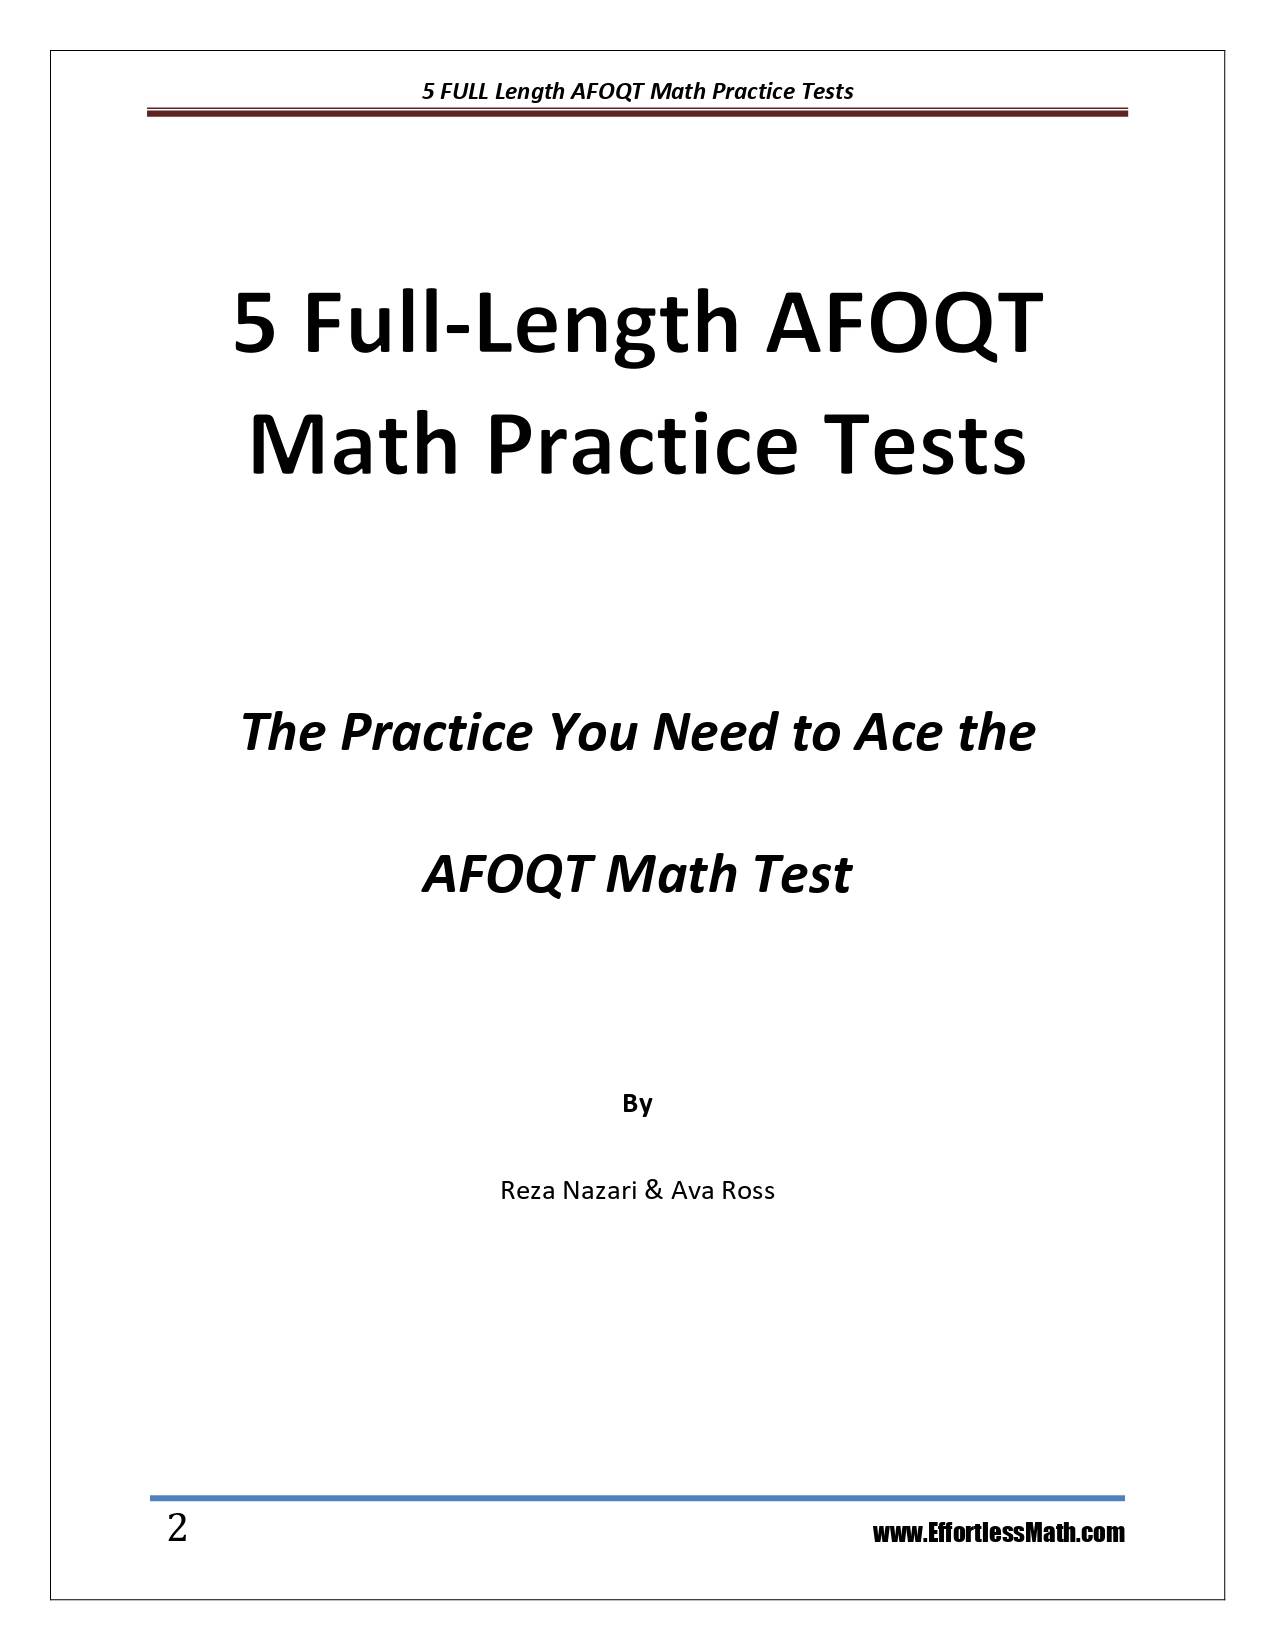 5-full-length-afoqt-math-practice-tests-the-practice-you-need-to-ace-the-afoqt-math-test